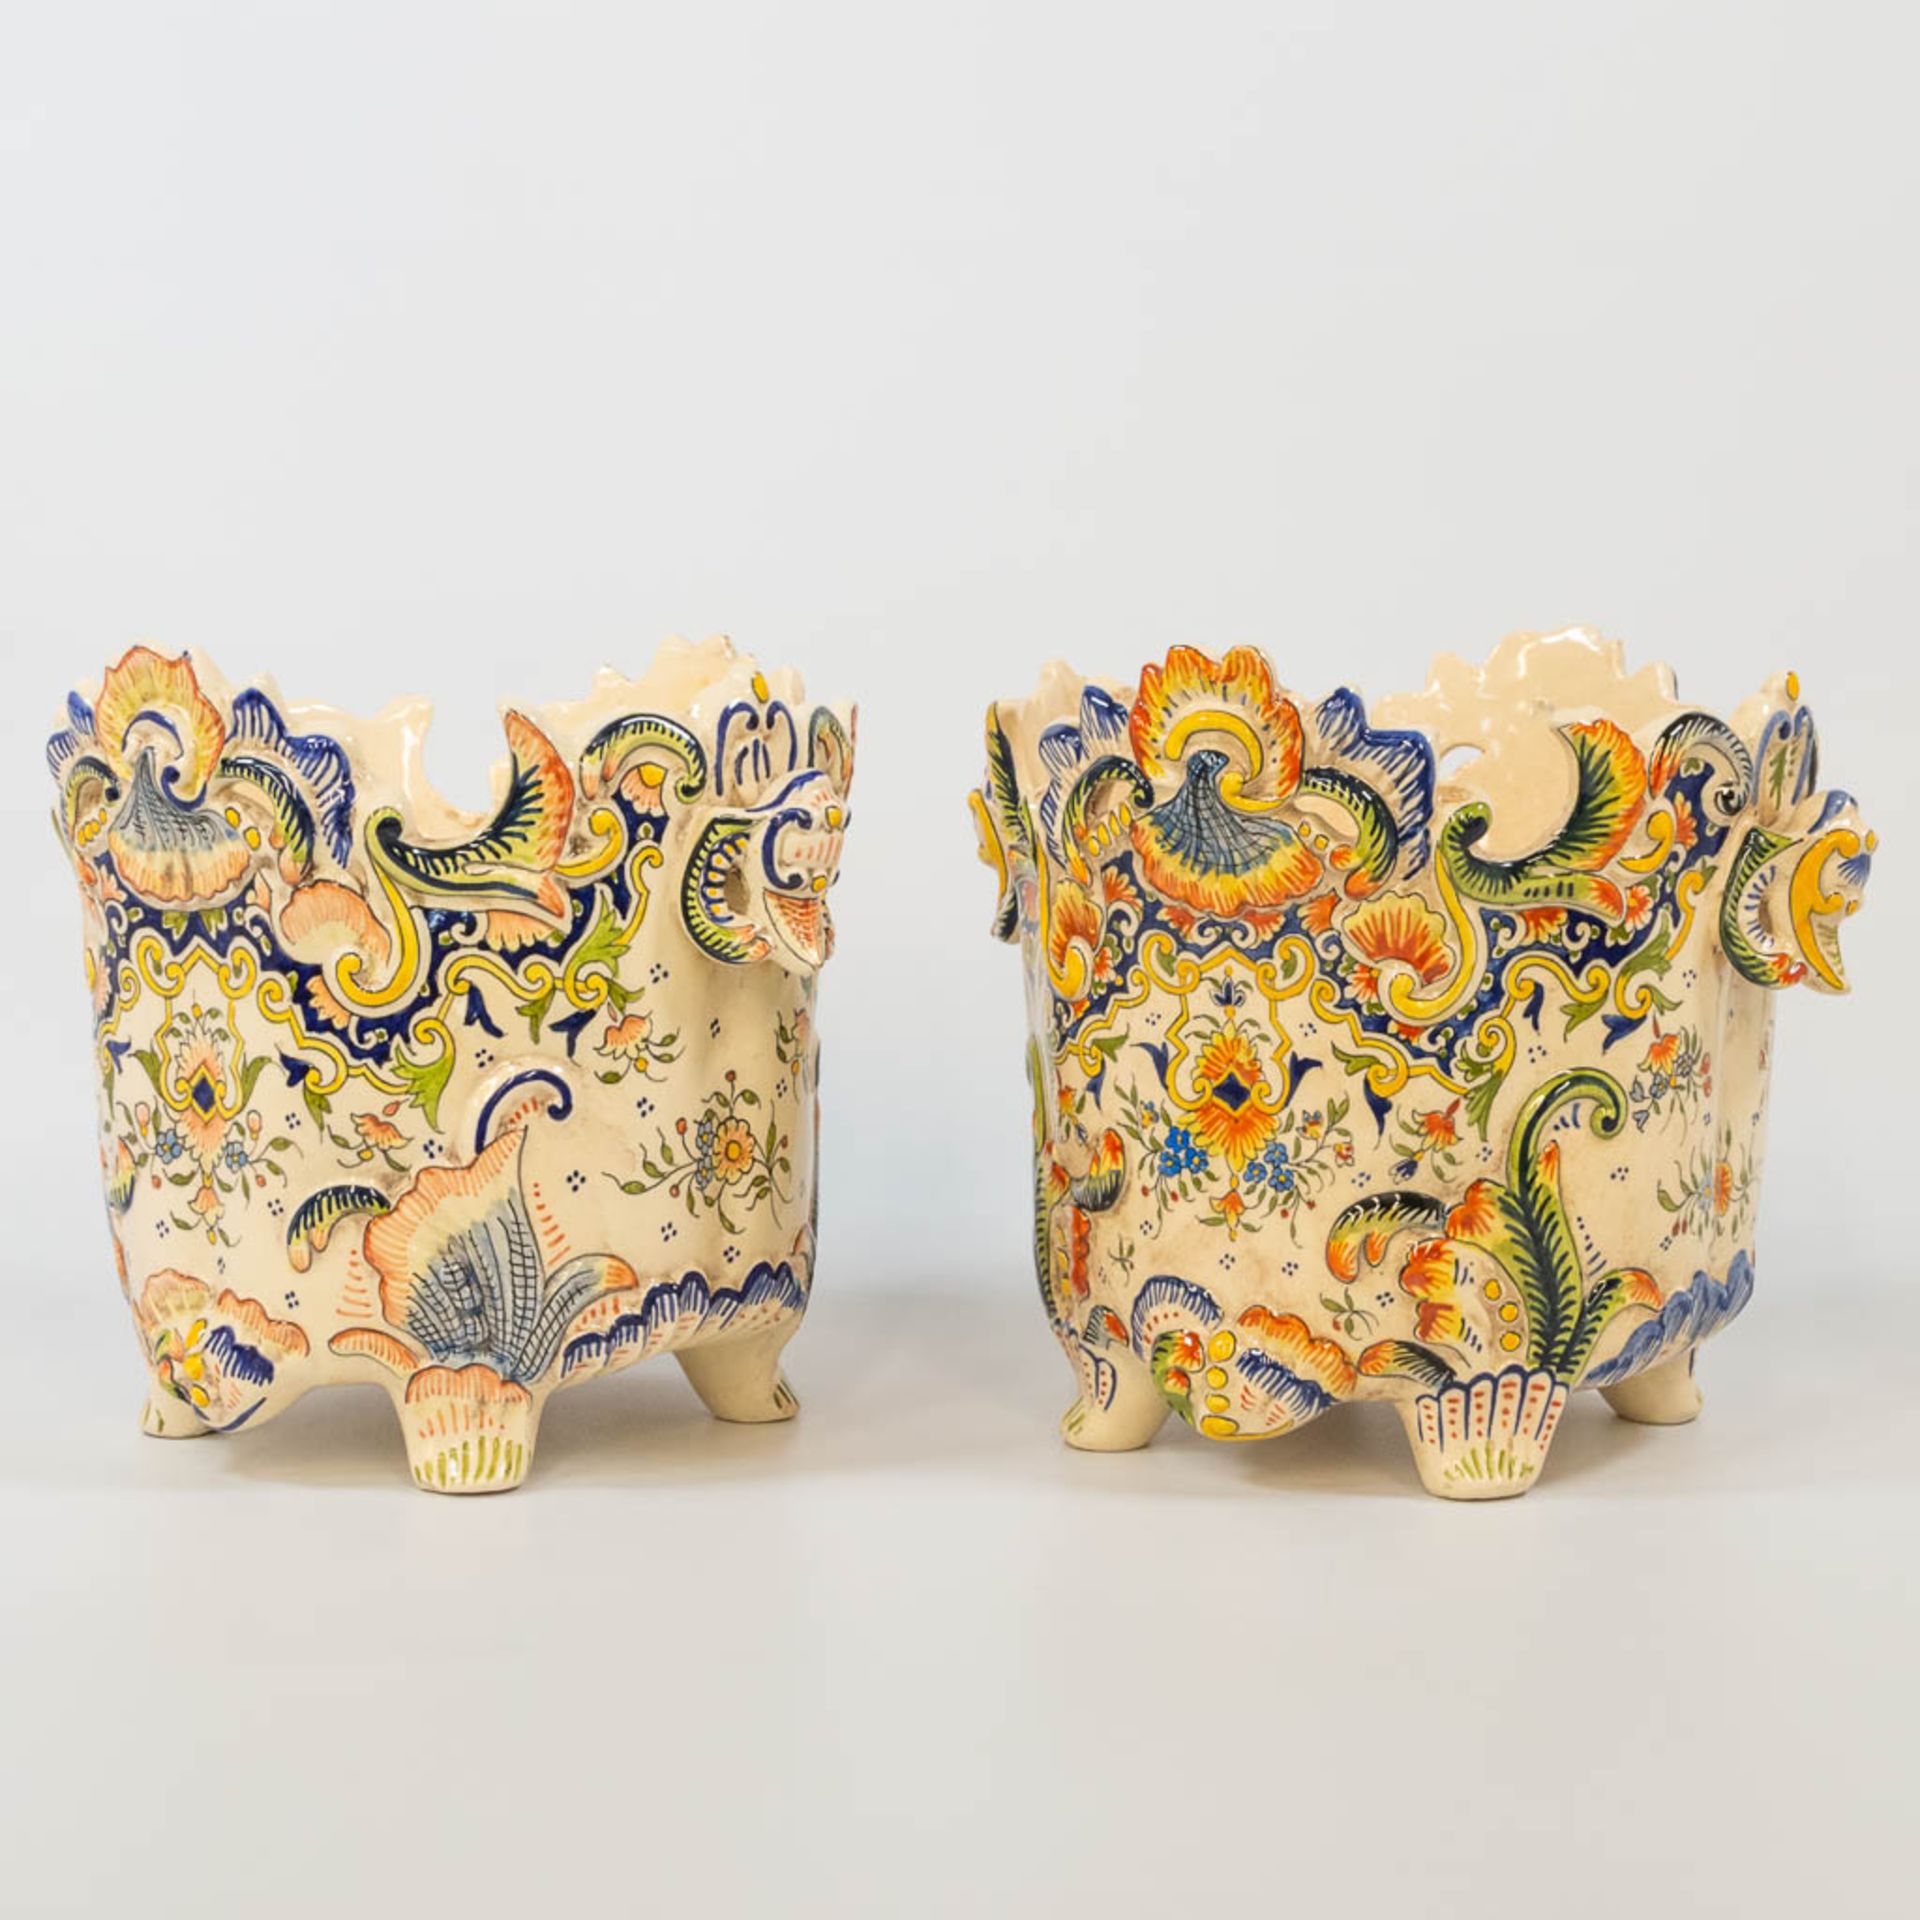 A pair of cache-pots with hand-painted decor, made of faience in Rouen, France. (23 x 27 x 22 cm) - Bild 9 aus 17